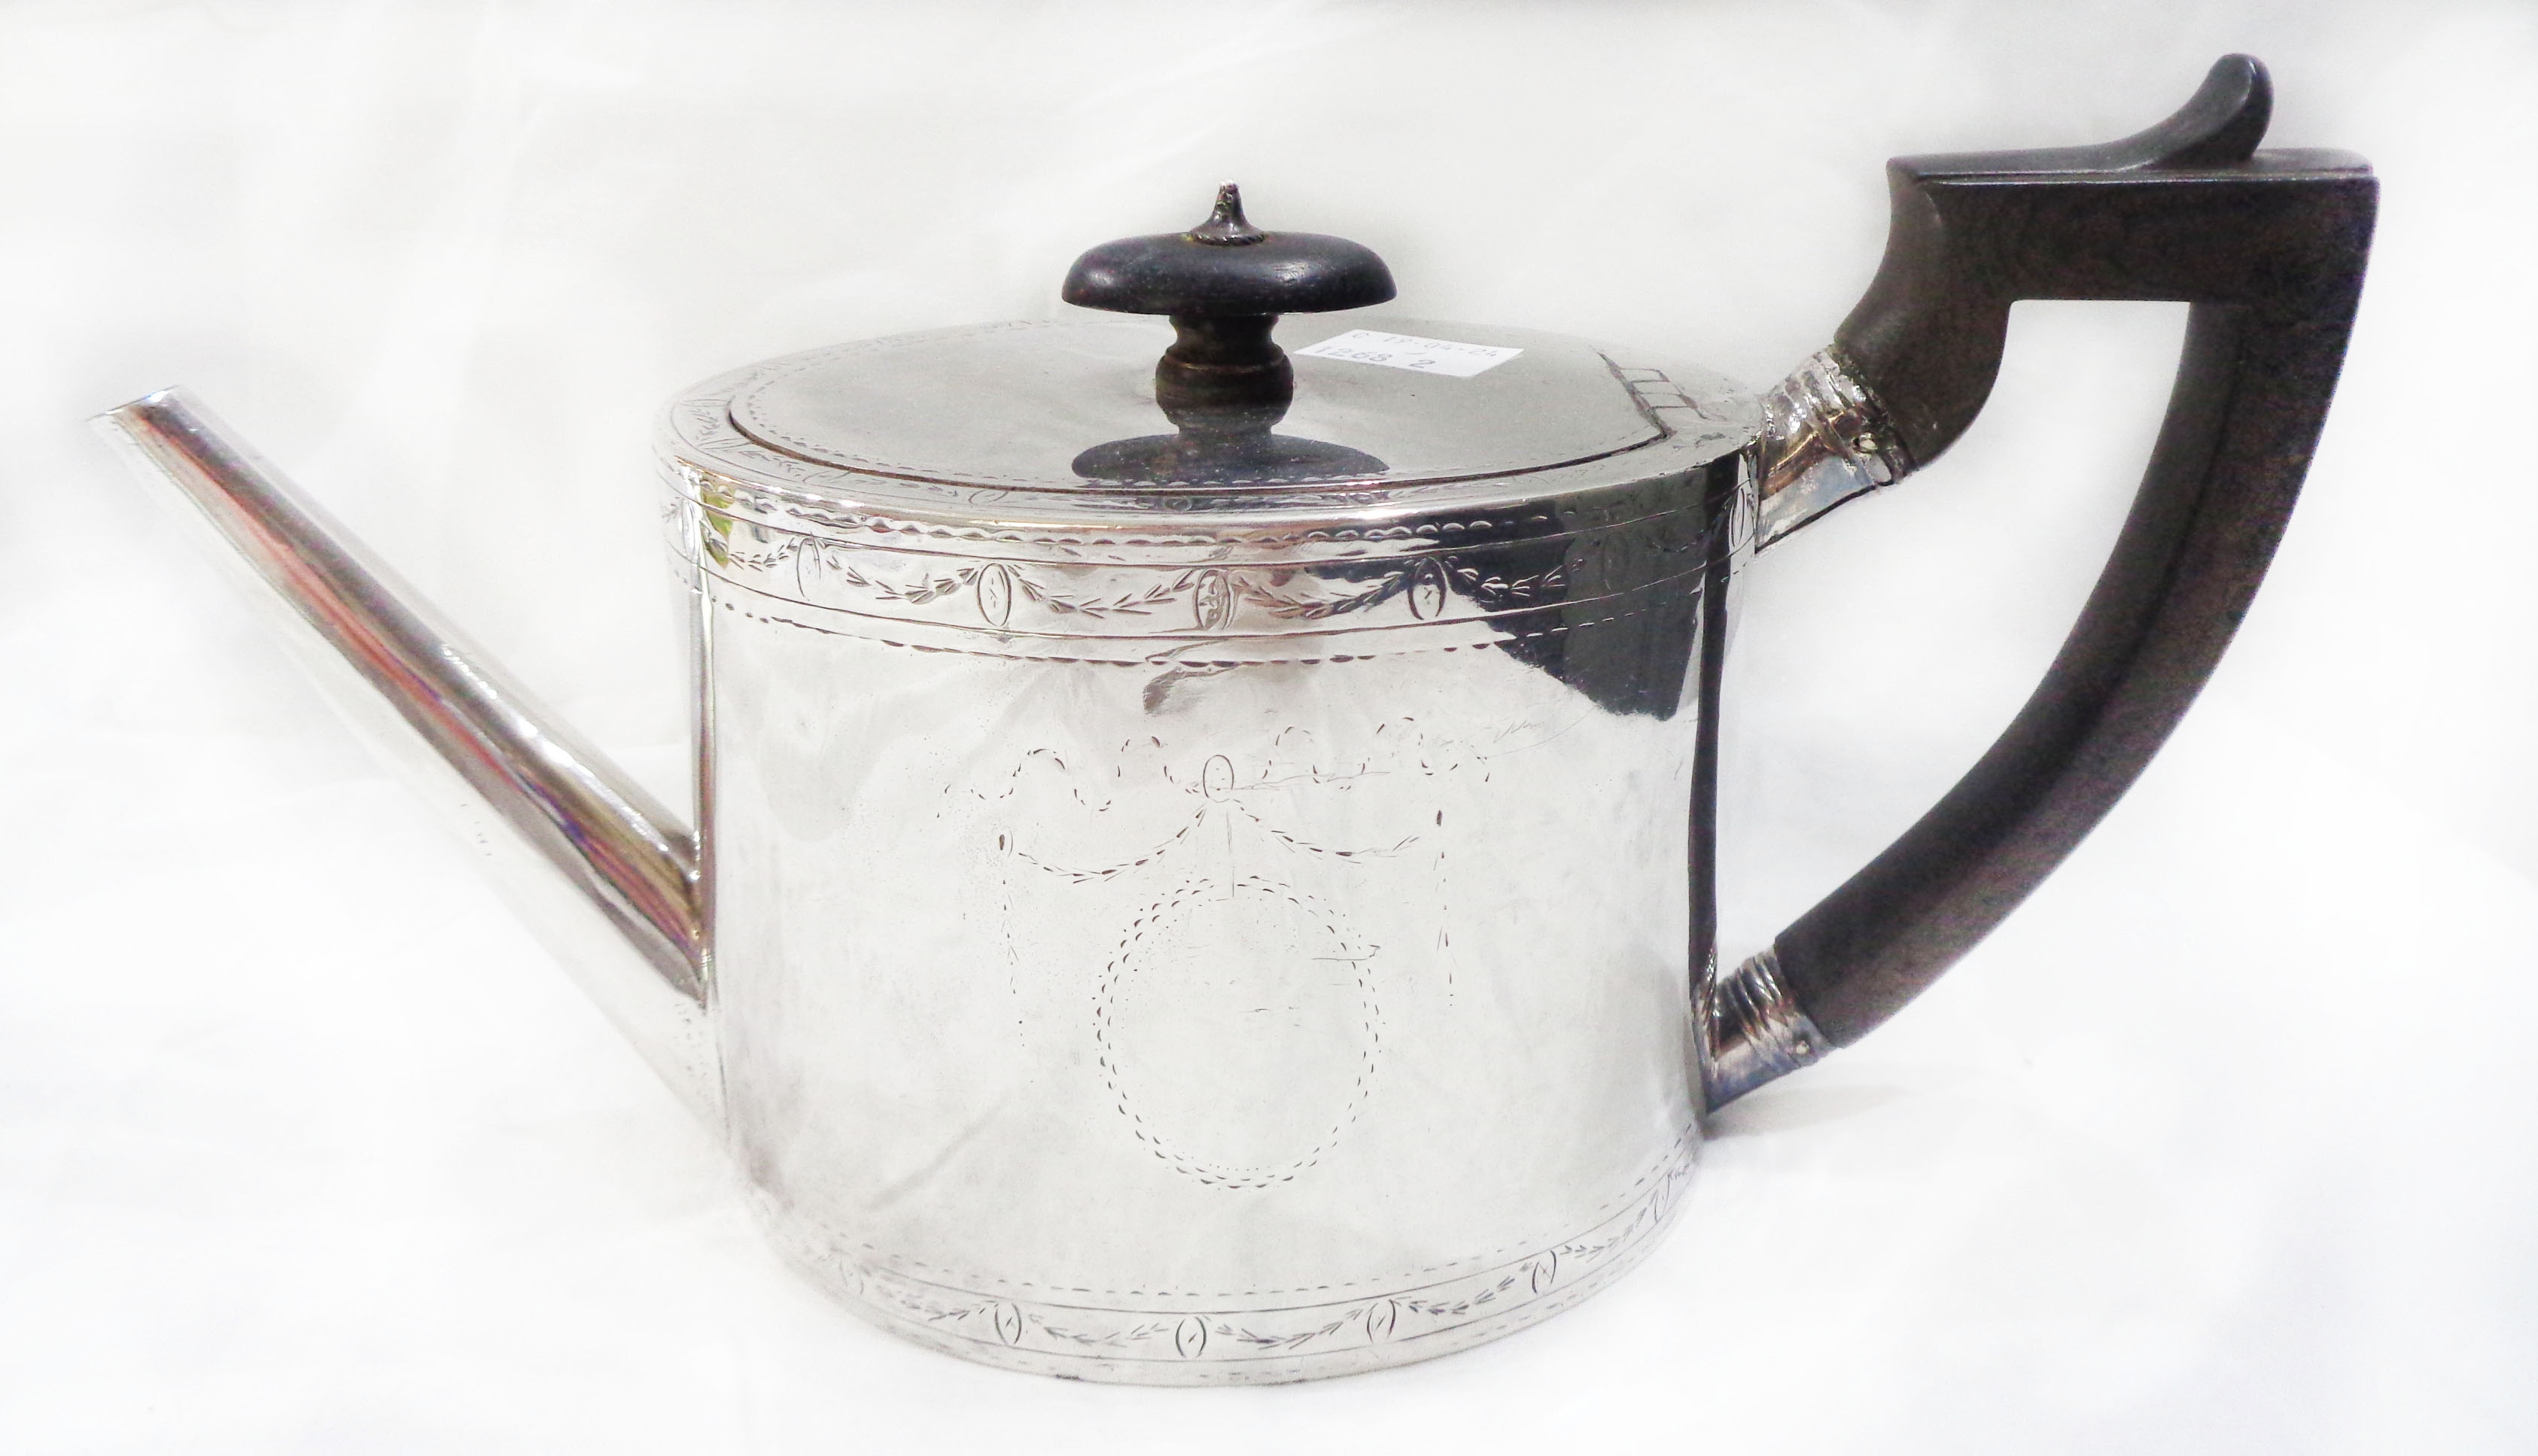 An antique silver oval teapot with ebony knop and handle (remains of chased decoration) - London